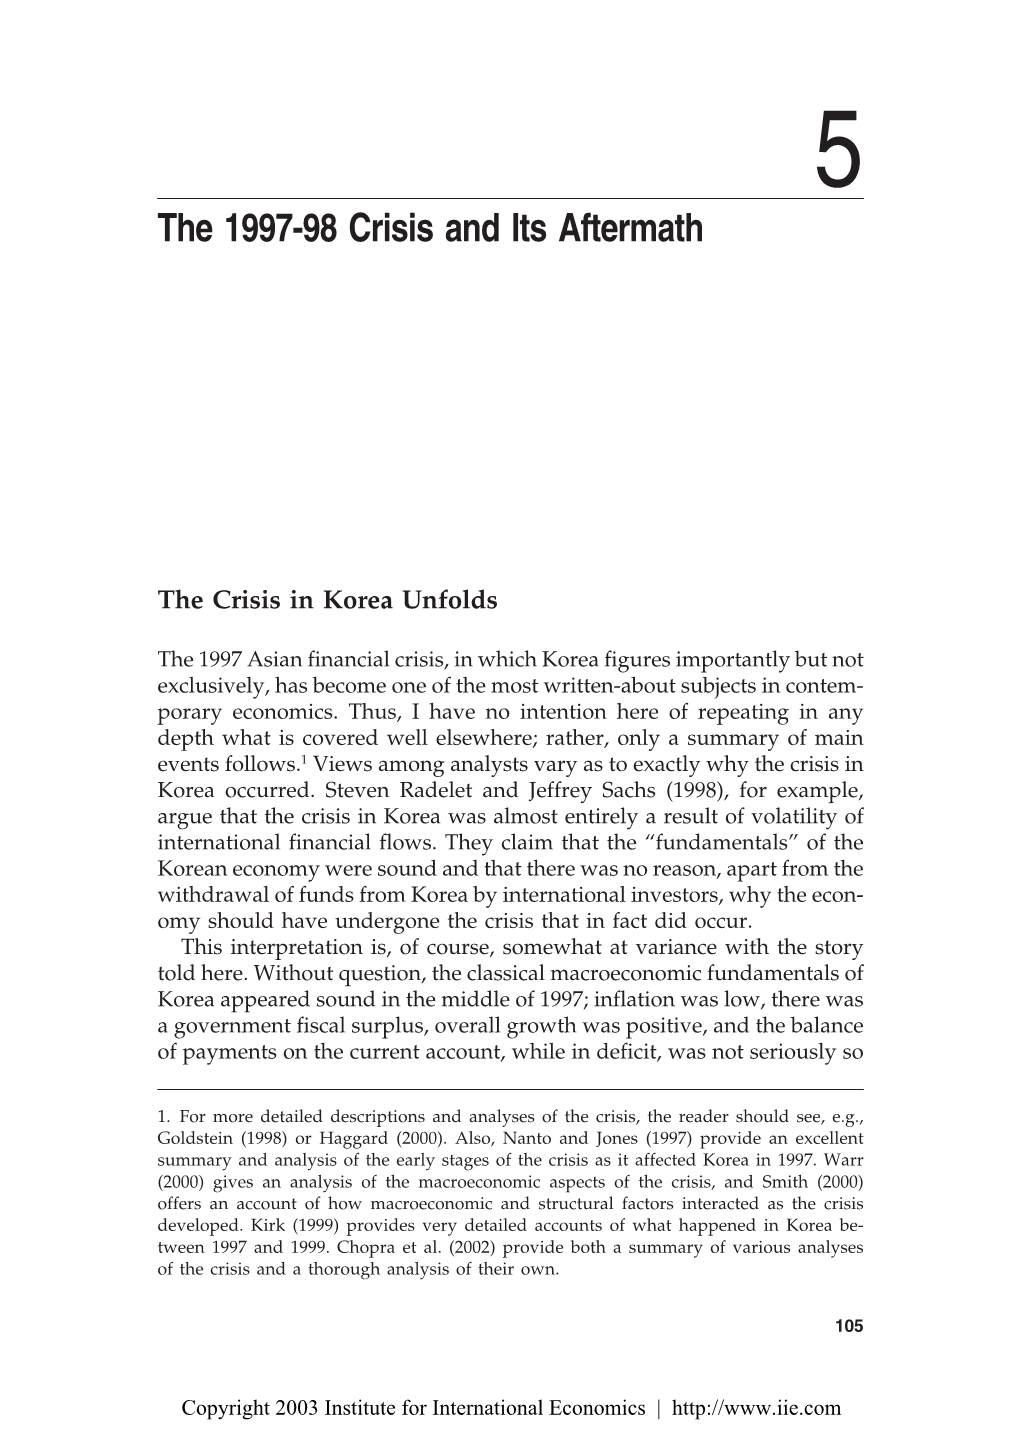 Chapter 5: the 1997-98 Crisis and Its Aftermath